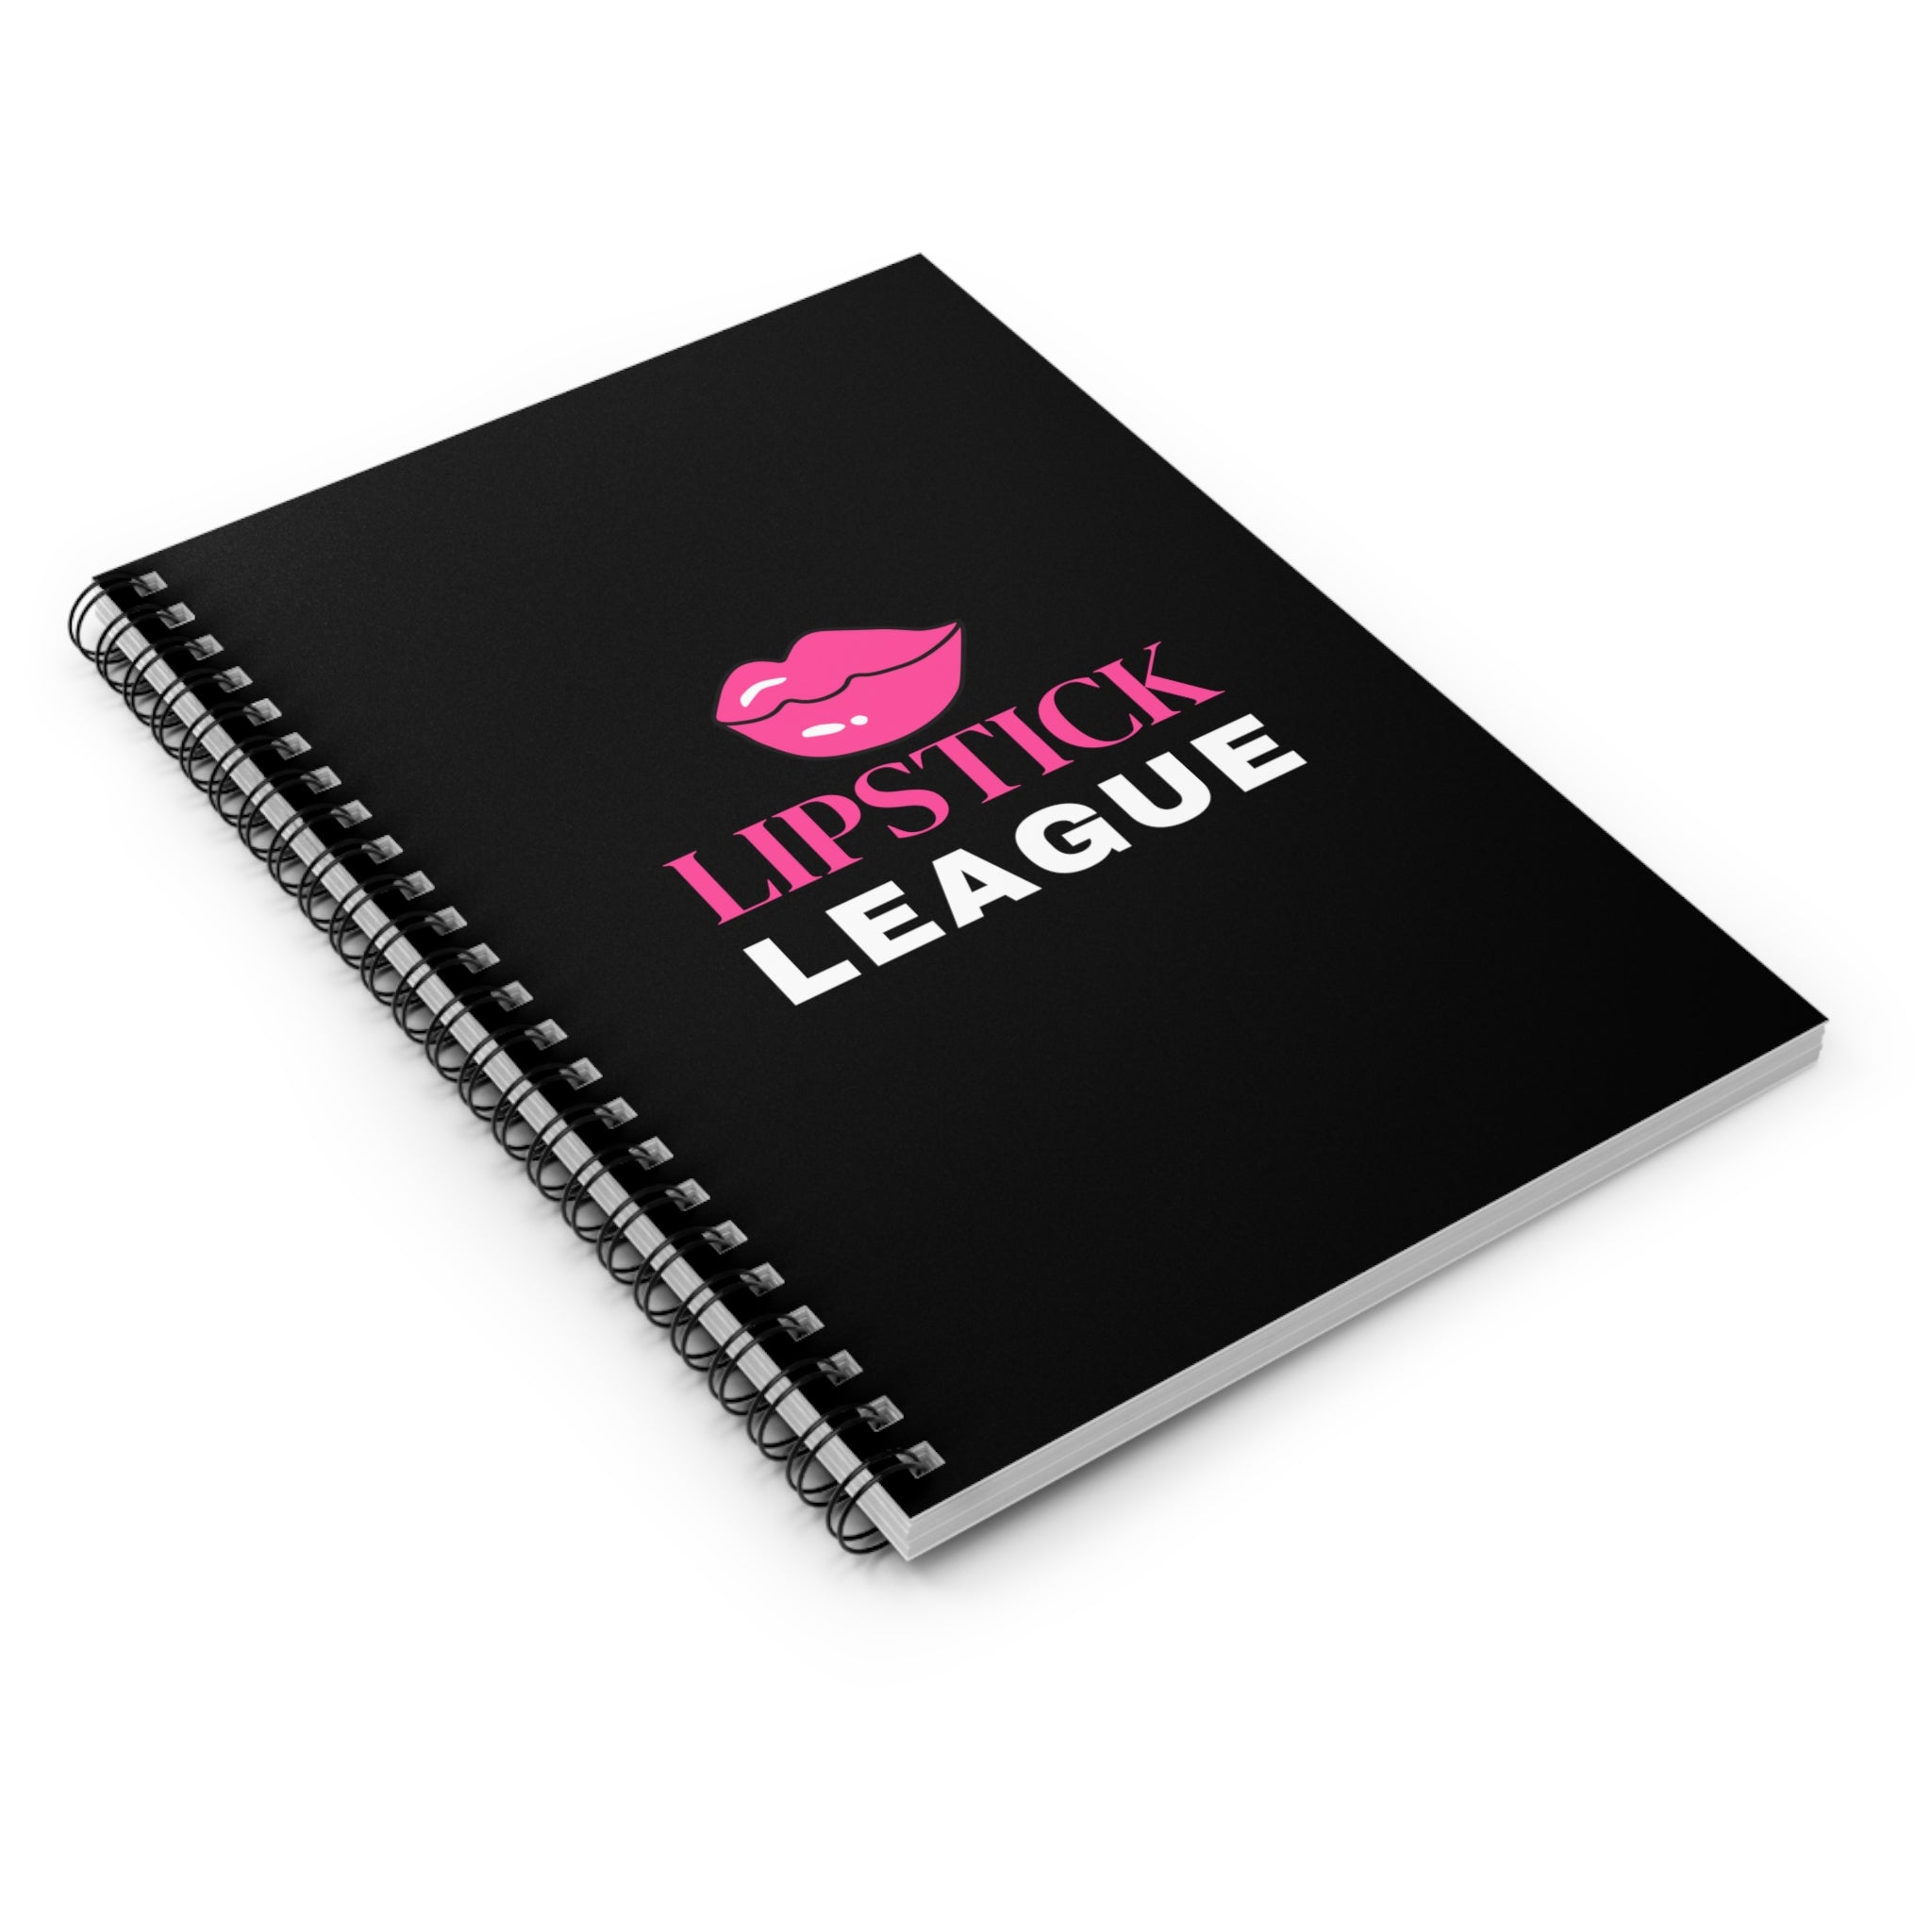 Lipstick League (Pink Lips) Spiral Notebook, Beauty Business Journal, Boss Babe Notebook Paper products  The Middle Aged Groove